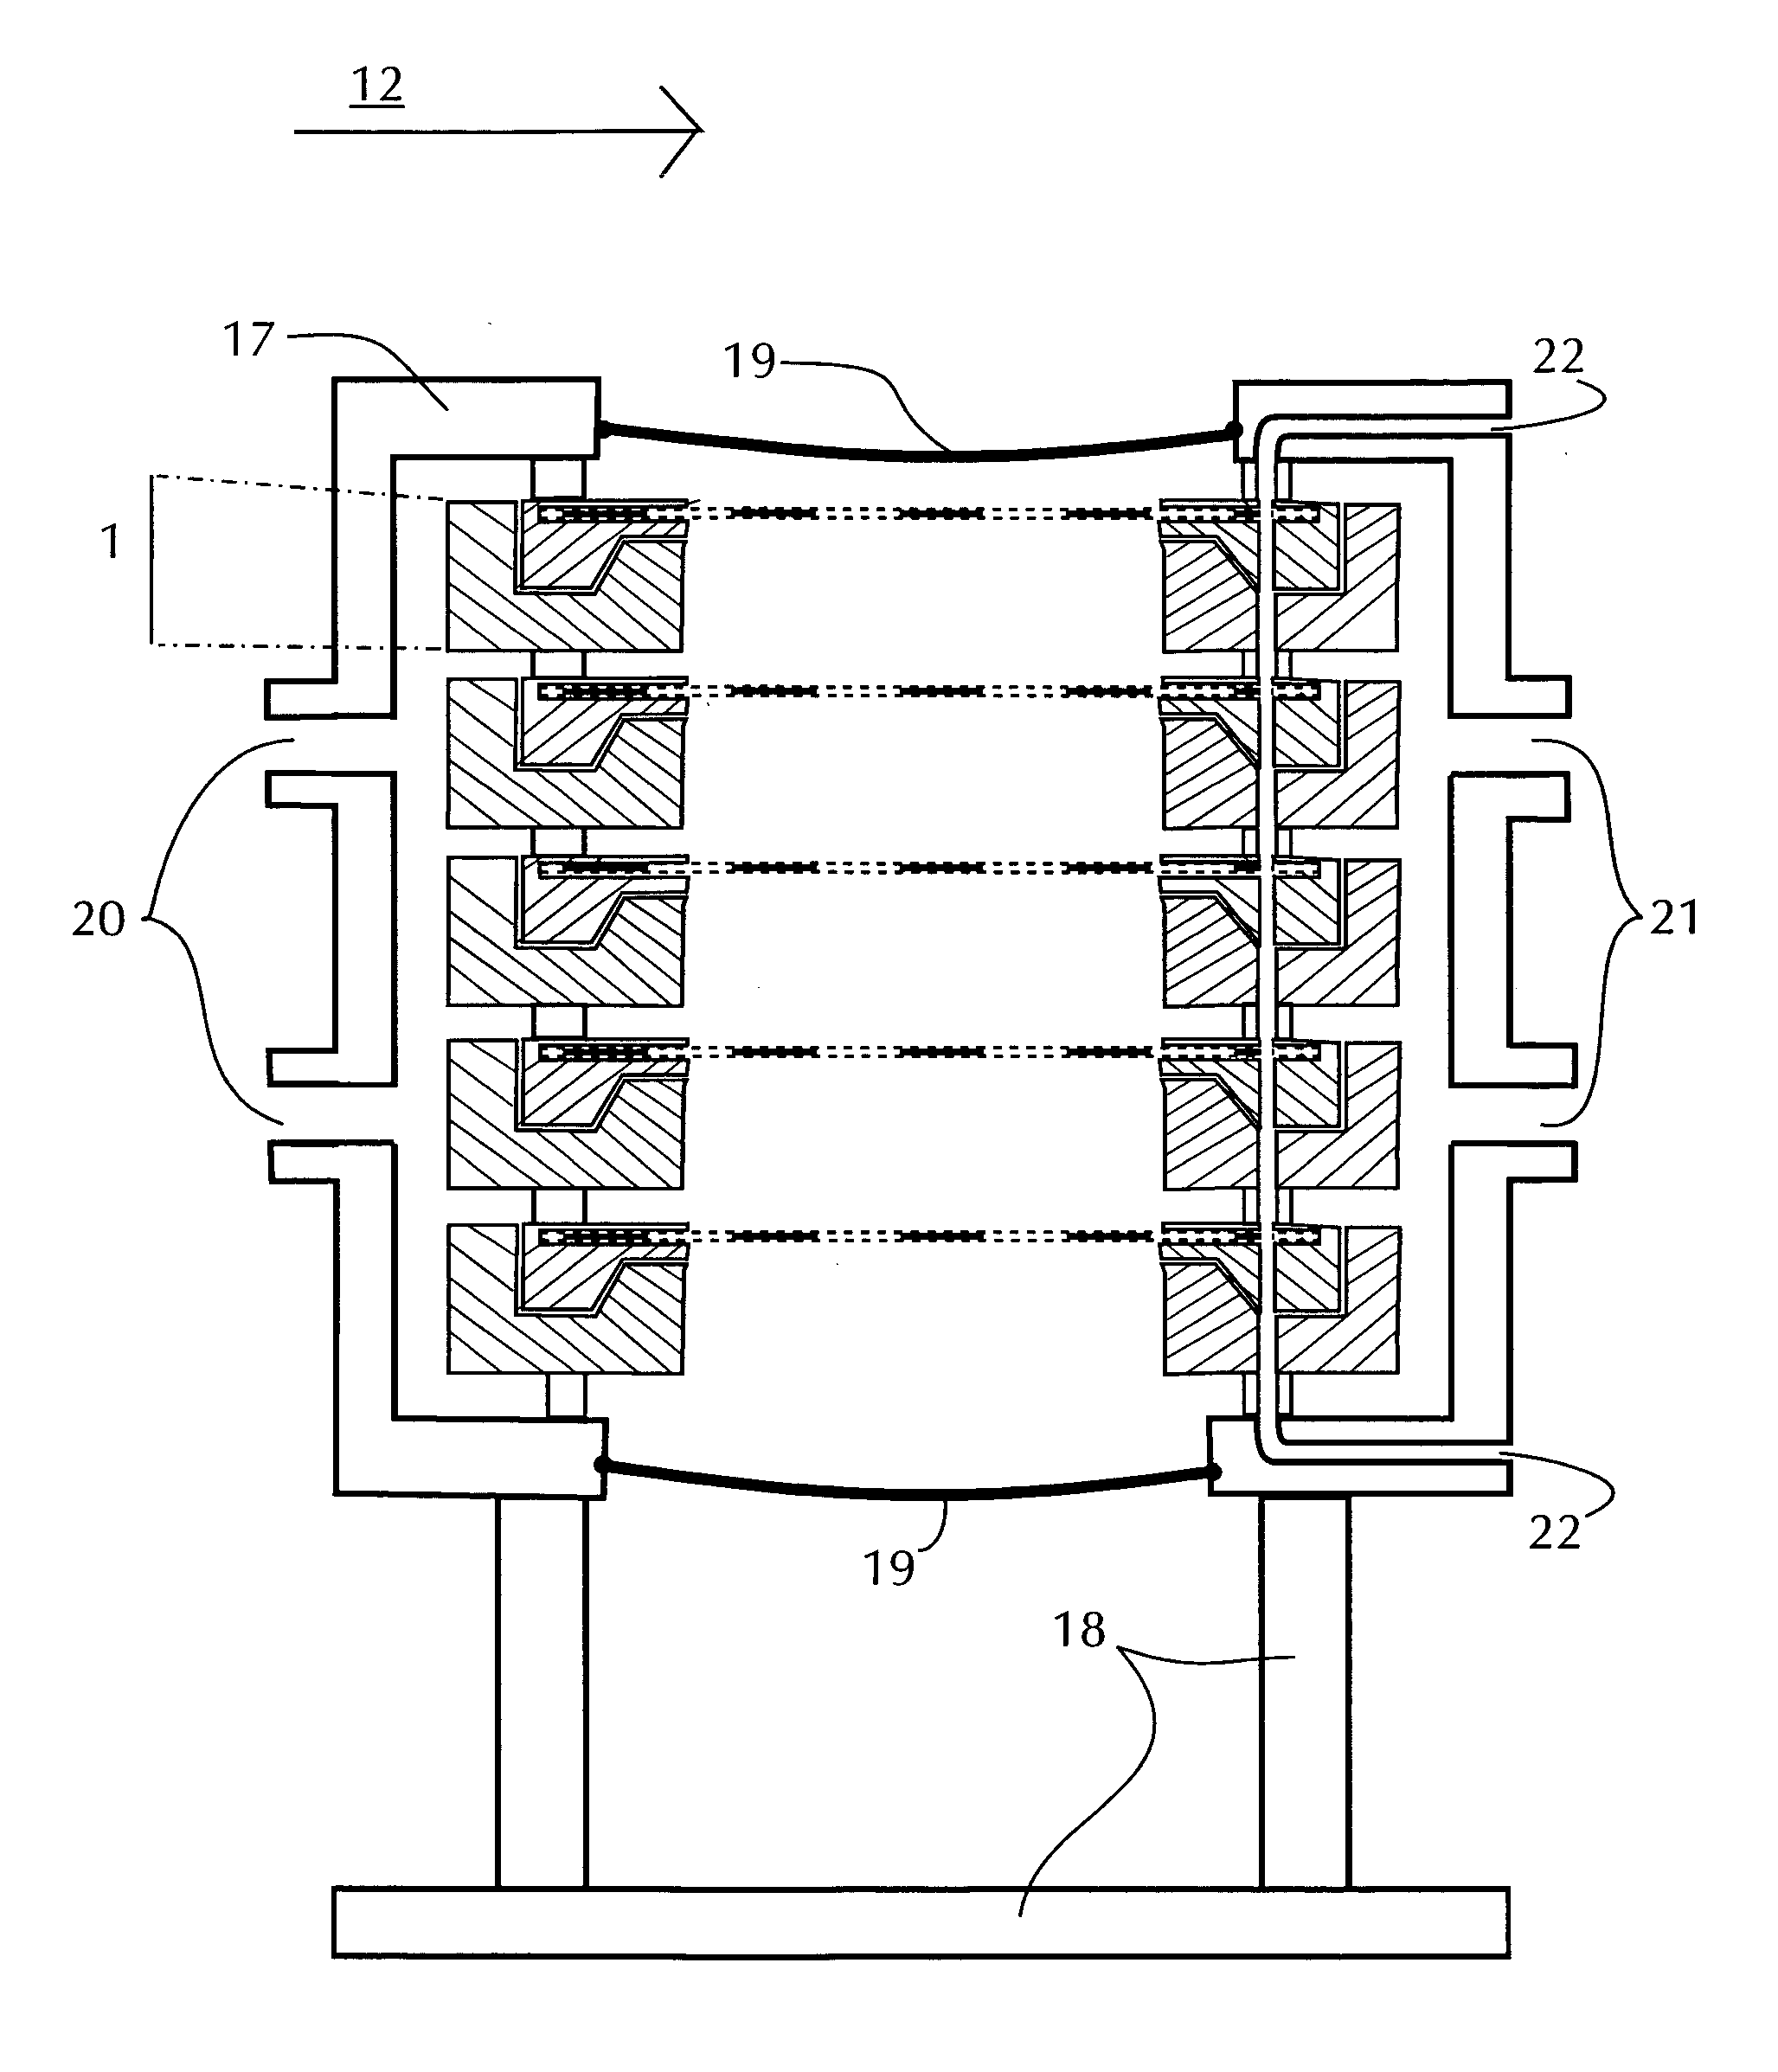 Filtration system with enhanced cleaning and dynamic fluid separation